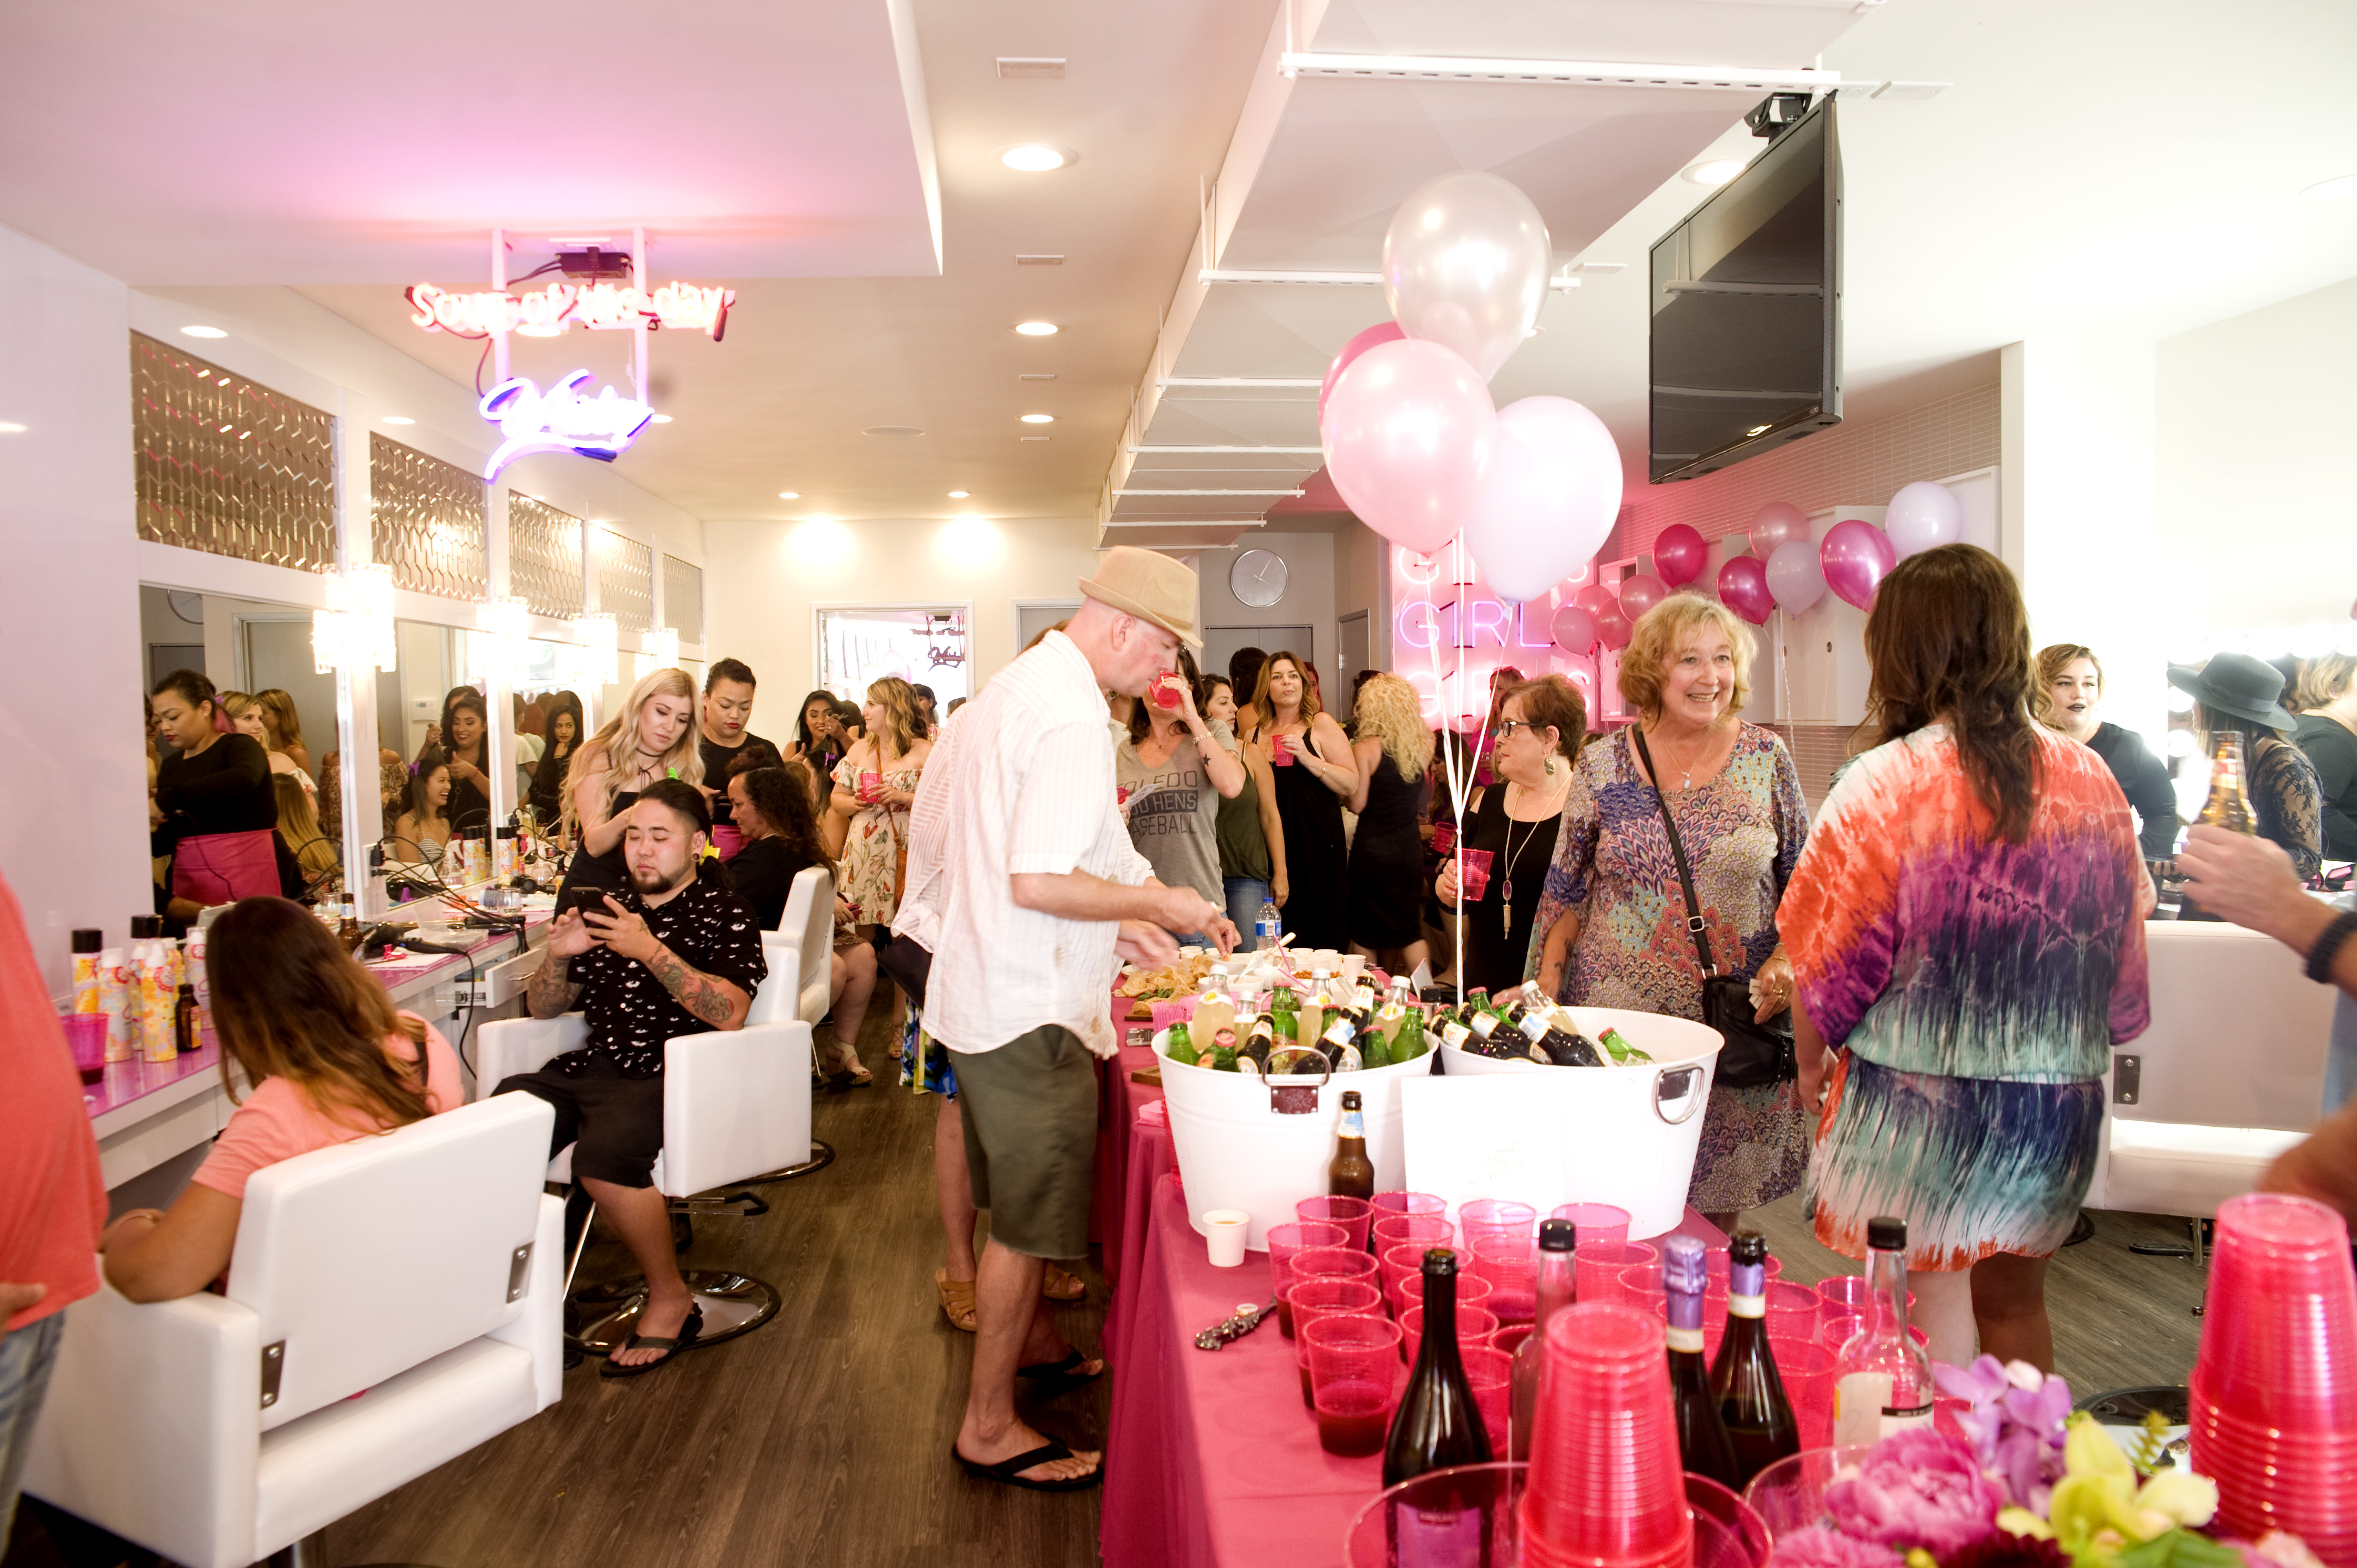 THE BLOW DOWN, BLOW DRY BAR, OPENS IN HUNTINGTON BEACH, CA